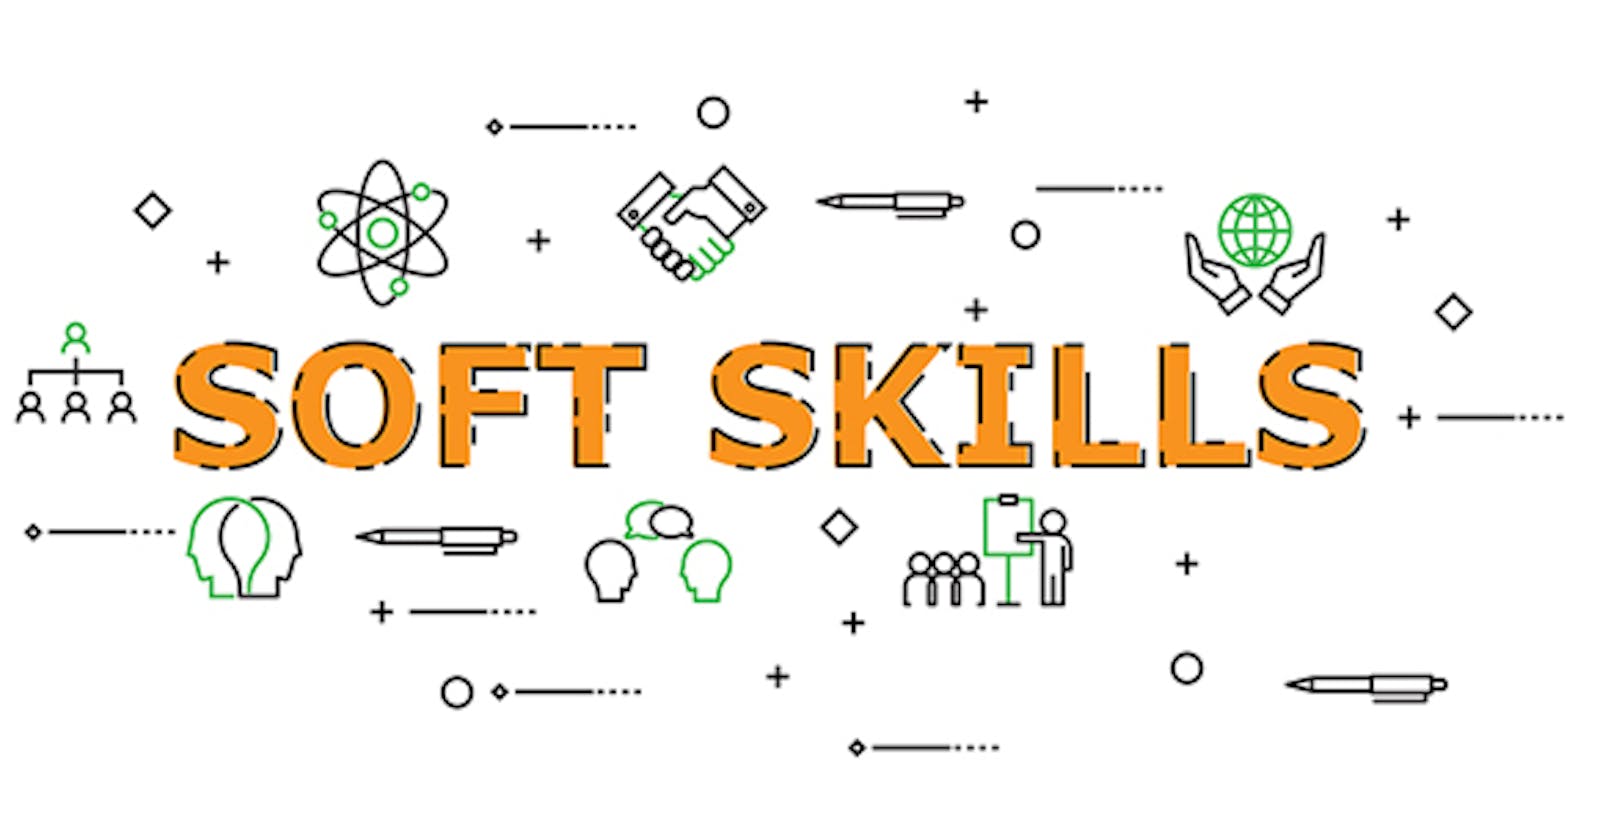 Importance of soft skills in technical roles